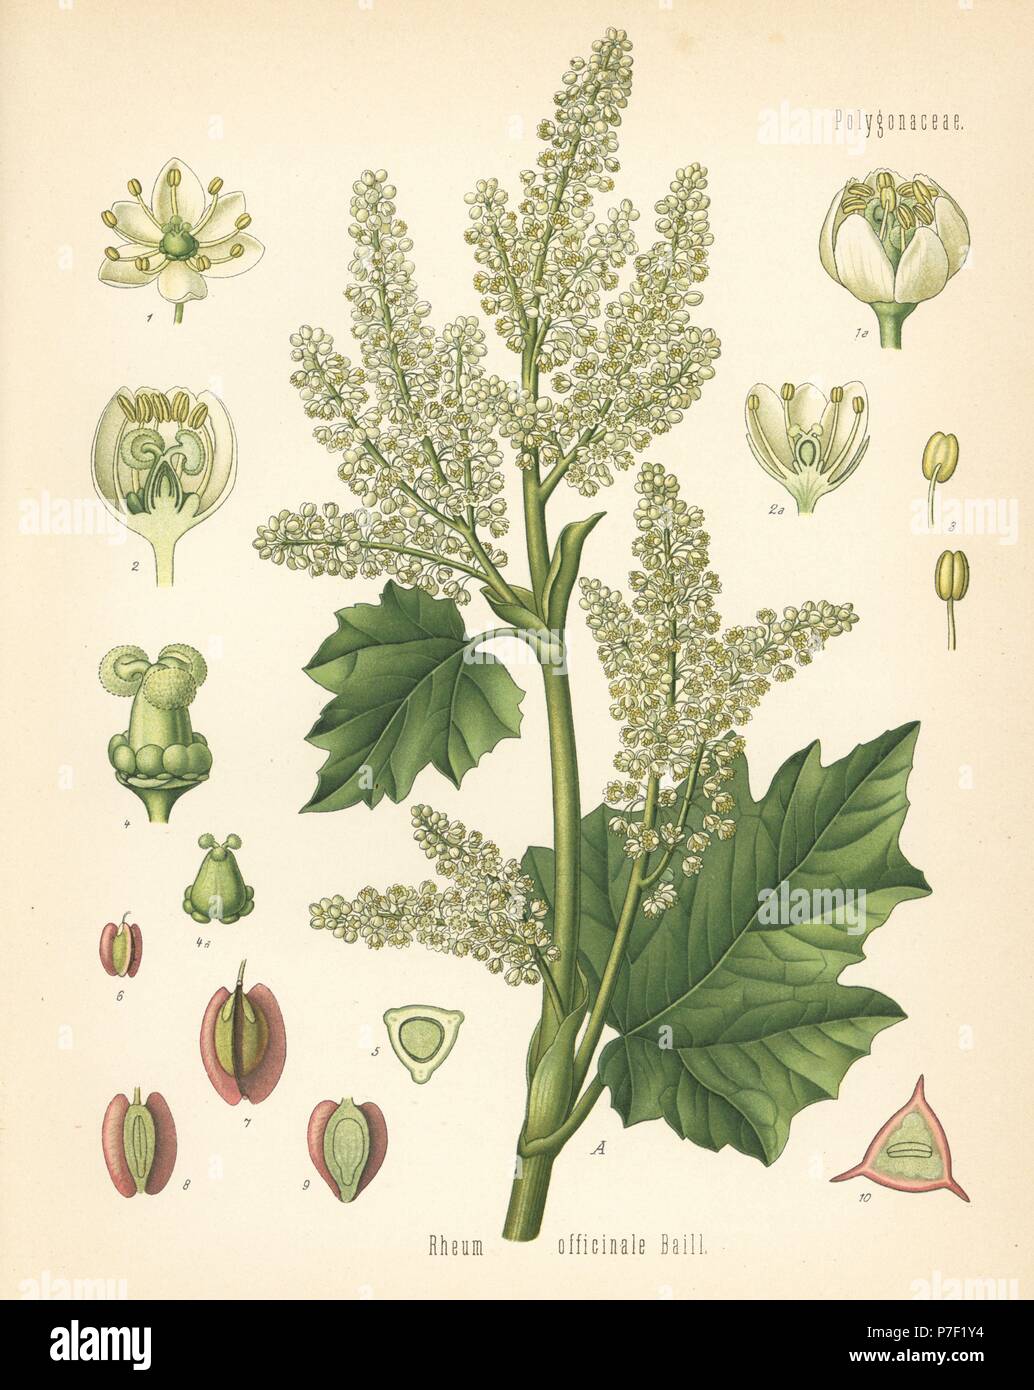 Chinese rhubarb, Rheum officinale. Chromolithograph after a botanical illustration from Hermann Adolph Koehler's Medicinal Plants, edited by Gustav Pabst, Koehler, Germany, 1887. Stock Photo